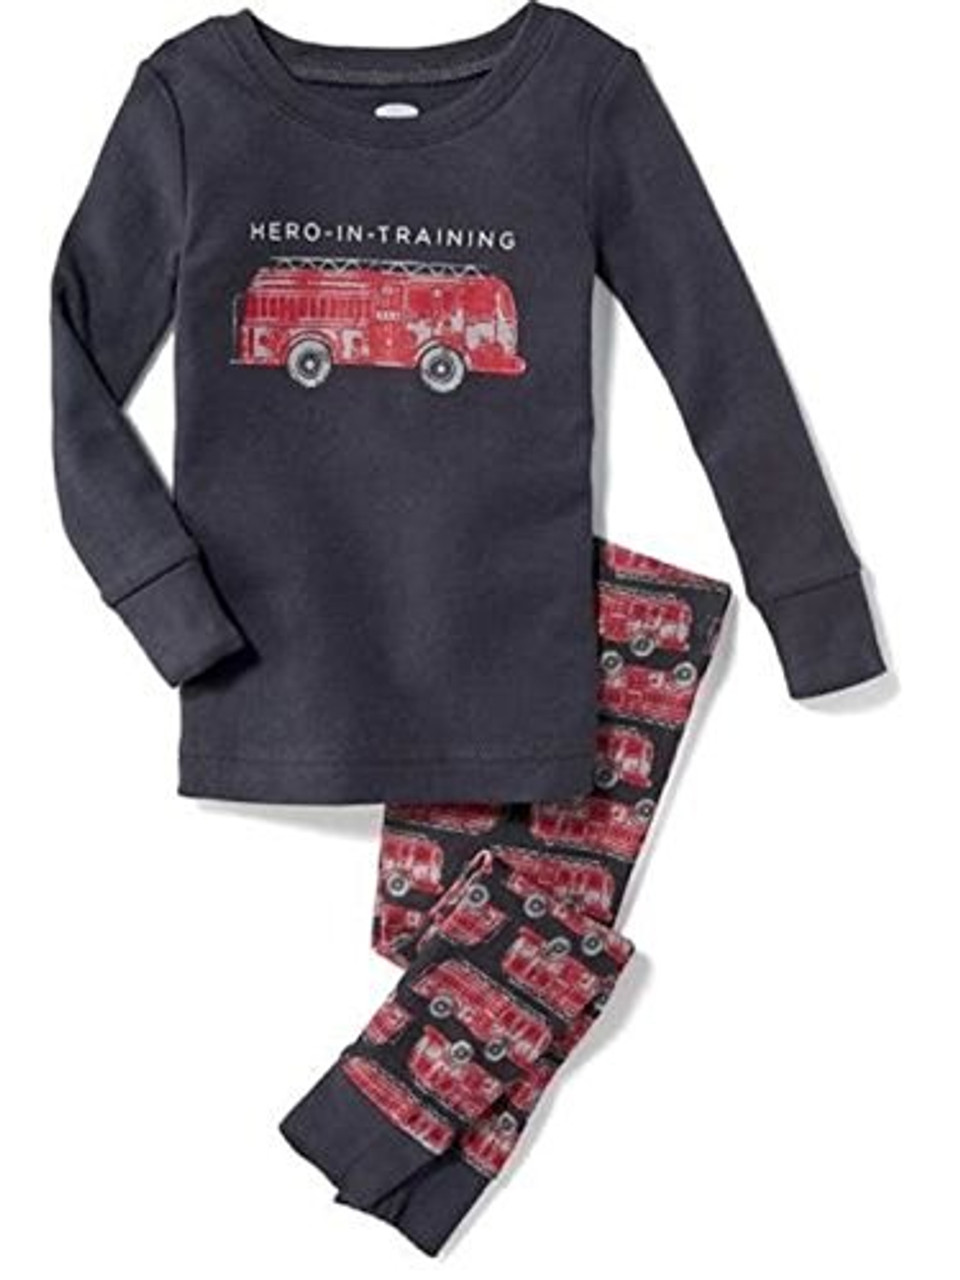 Old Navy Hero-In-Training Fire Truck Cotton Pants Pajama Set Size